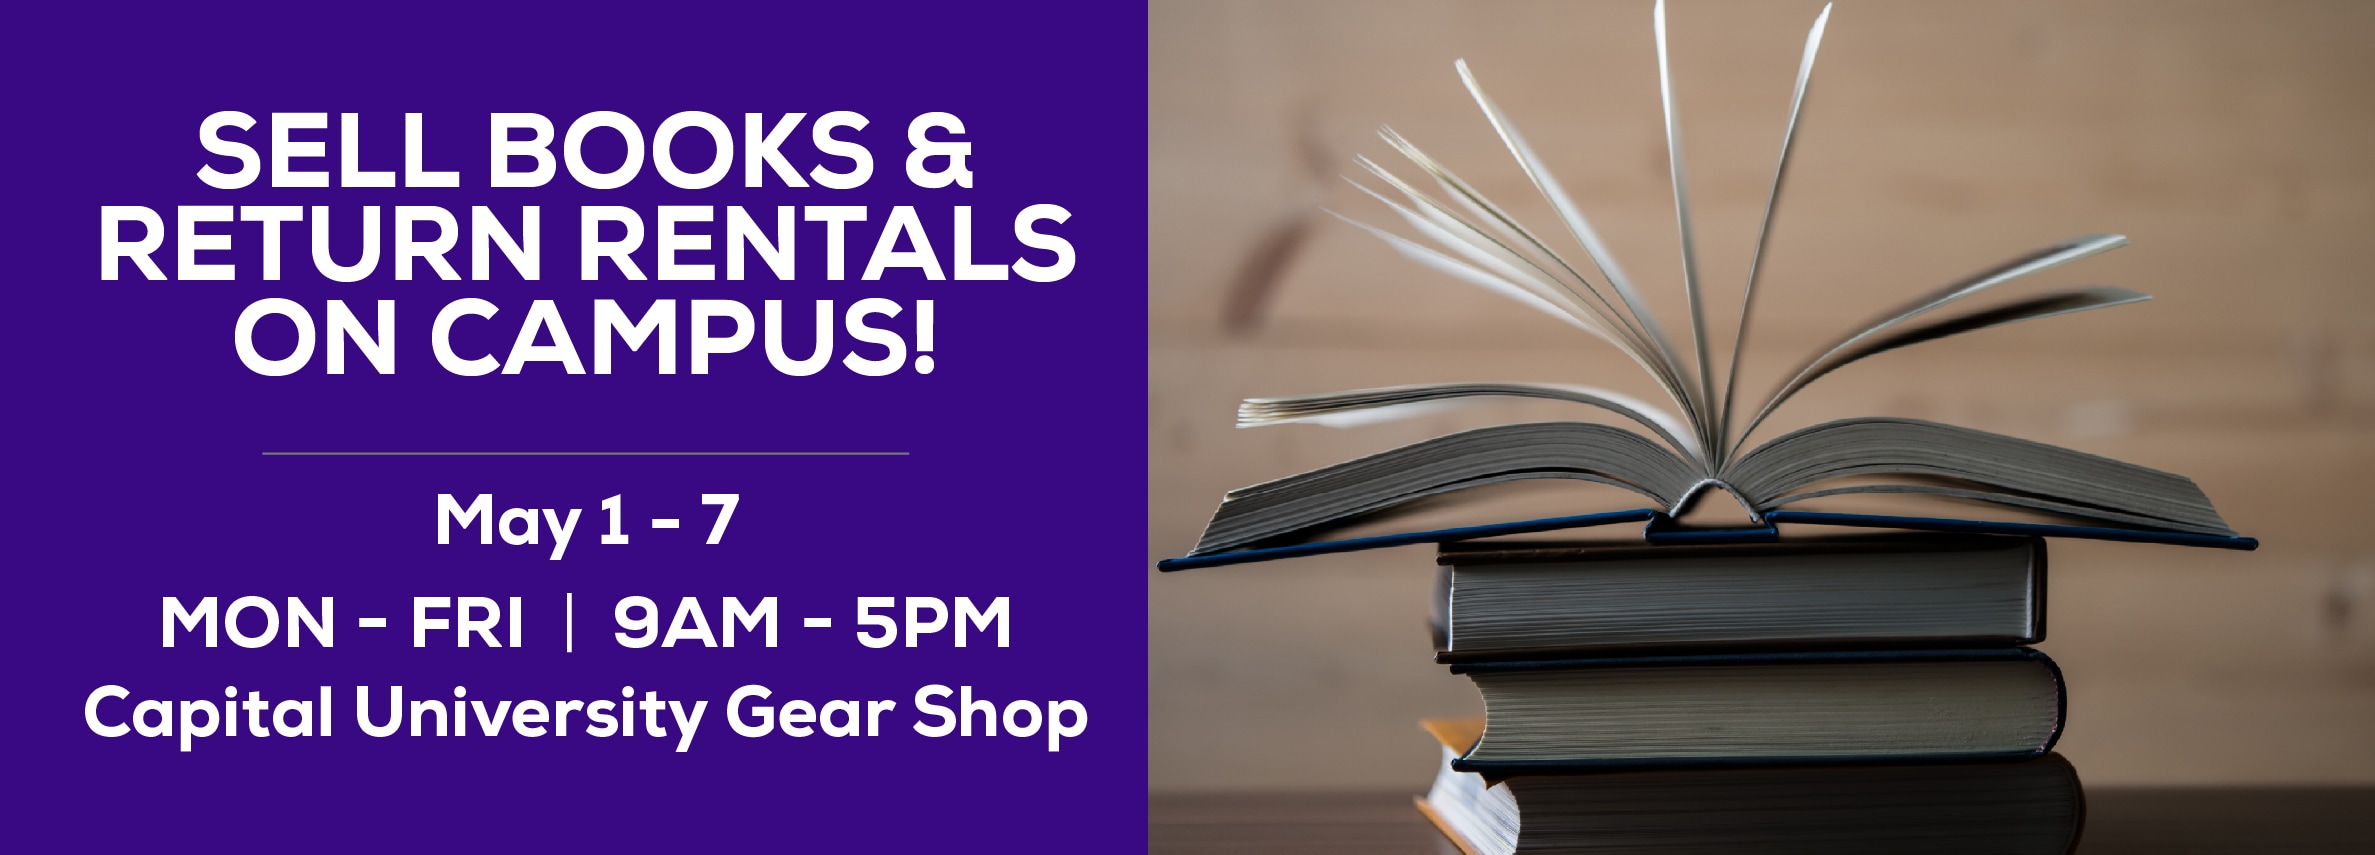 Sell books and return rentals on campus! May 1 - 7. Monday through Friday. 9am to 5pm at the Capital University Gear Shop